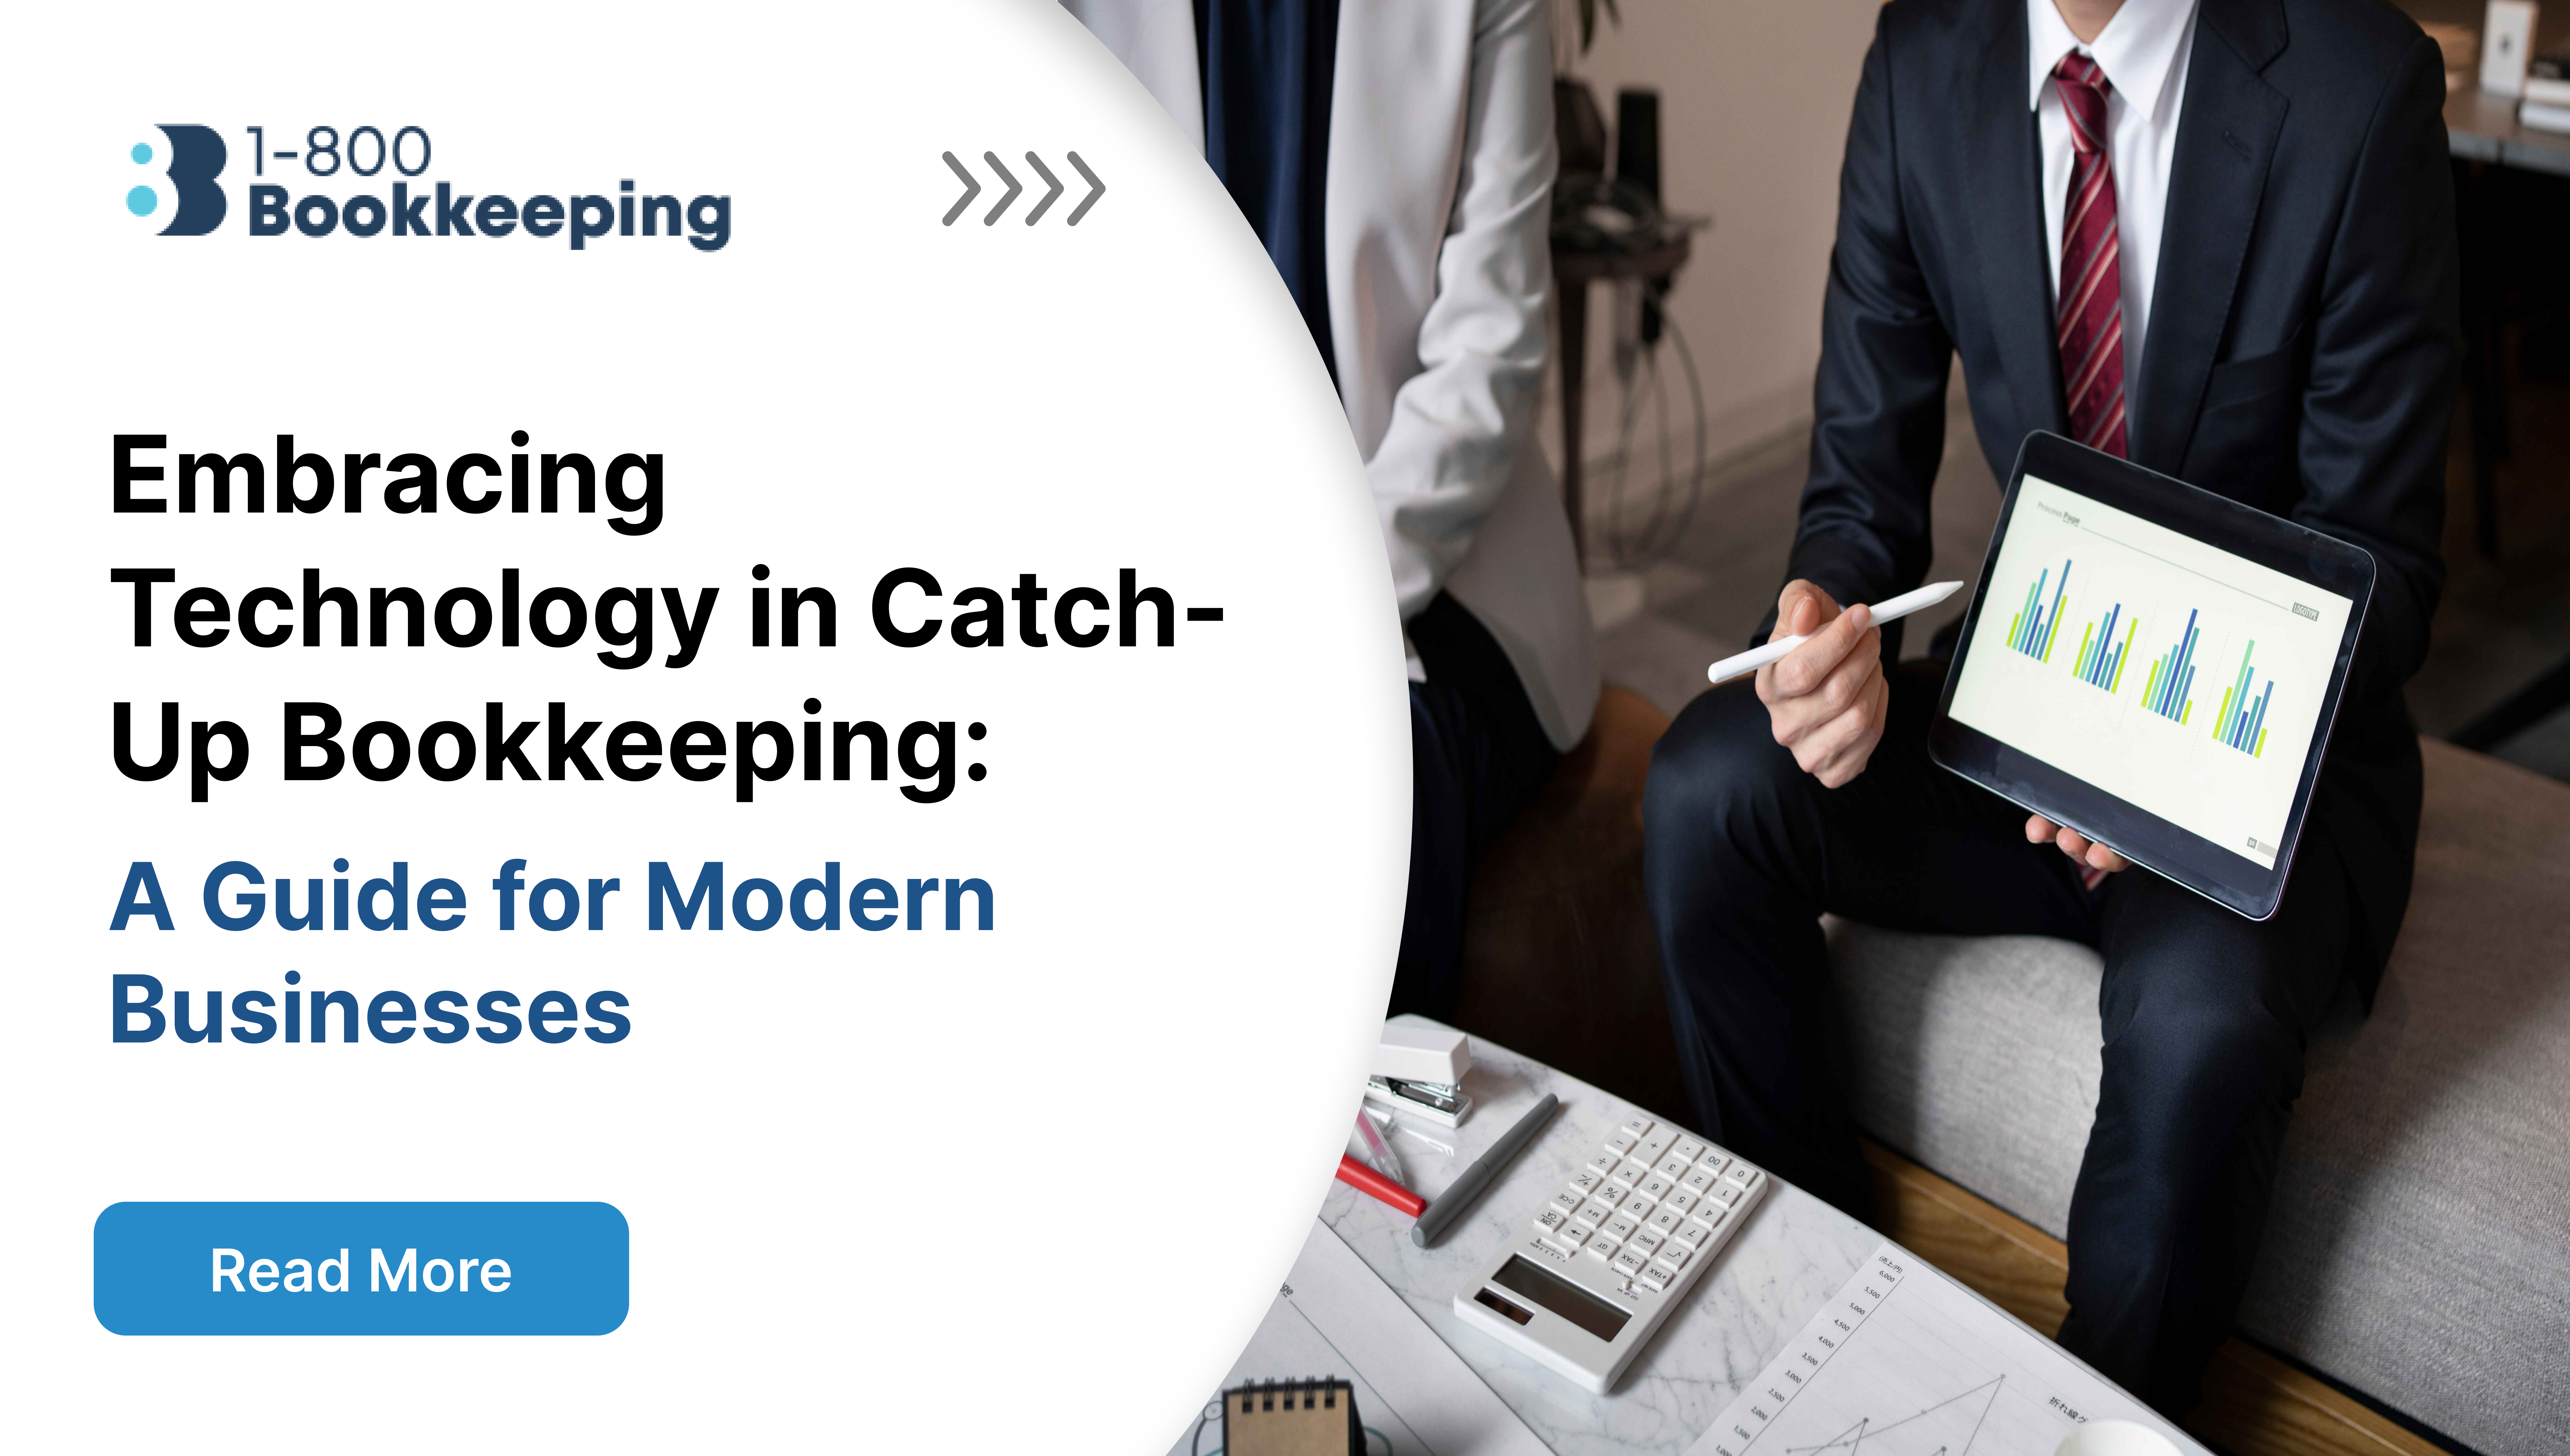 Embracing Technology in Catch-Up Bookkeeping: A Guide for Modern Businesses